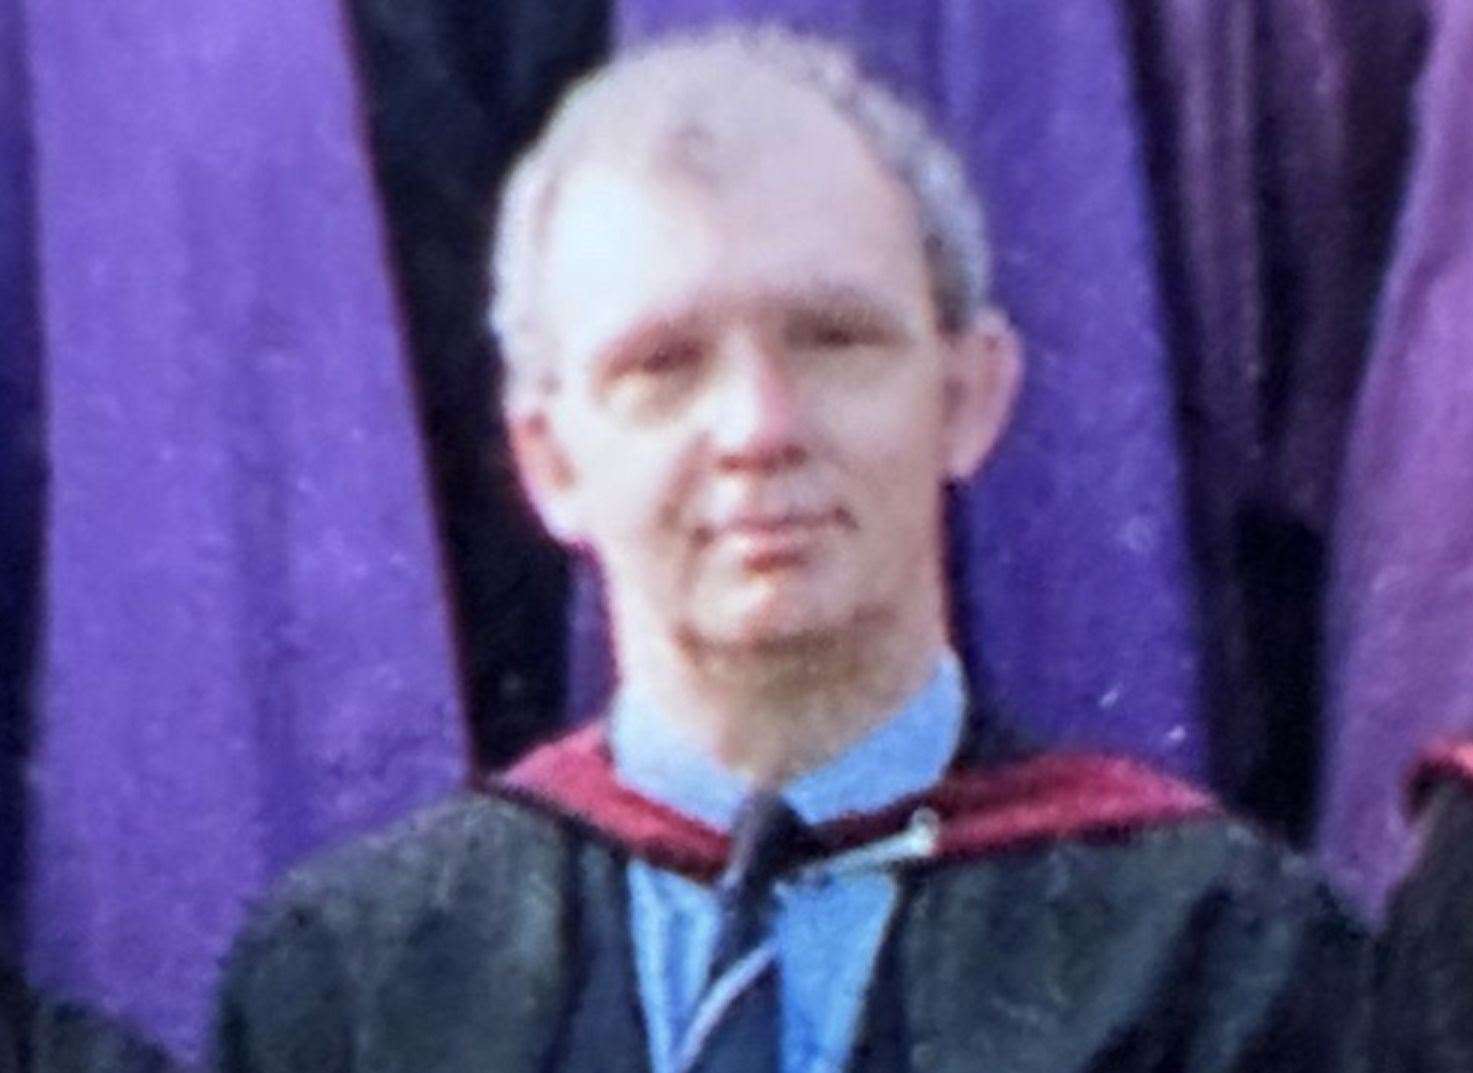 Martin Miles taught at the King's School in Canterbury from 1980 to 2020